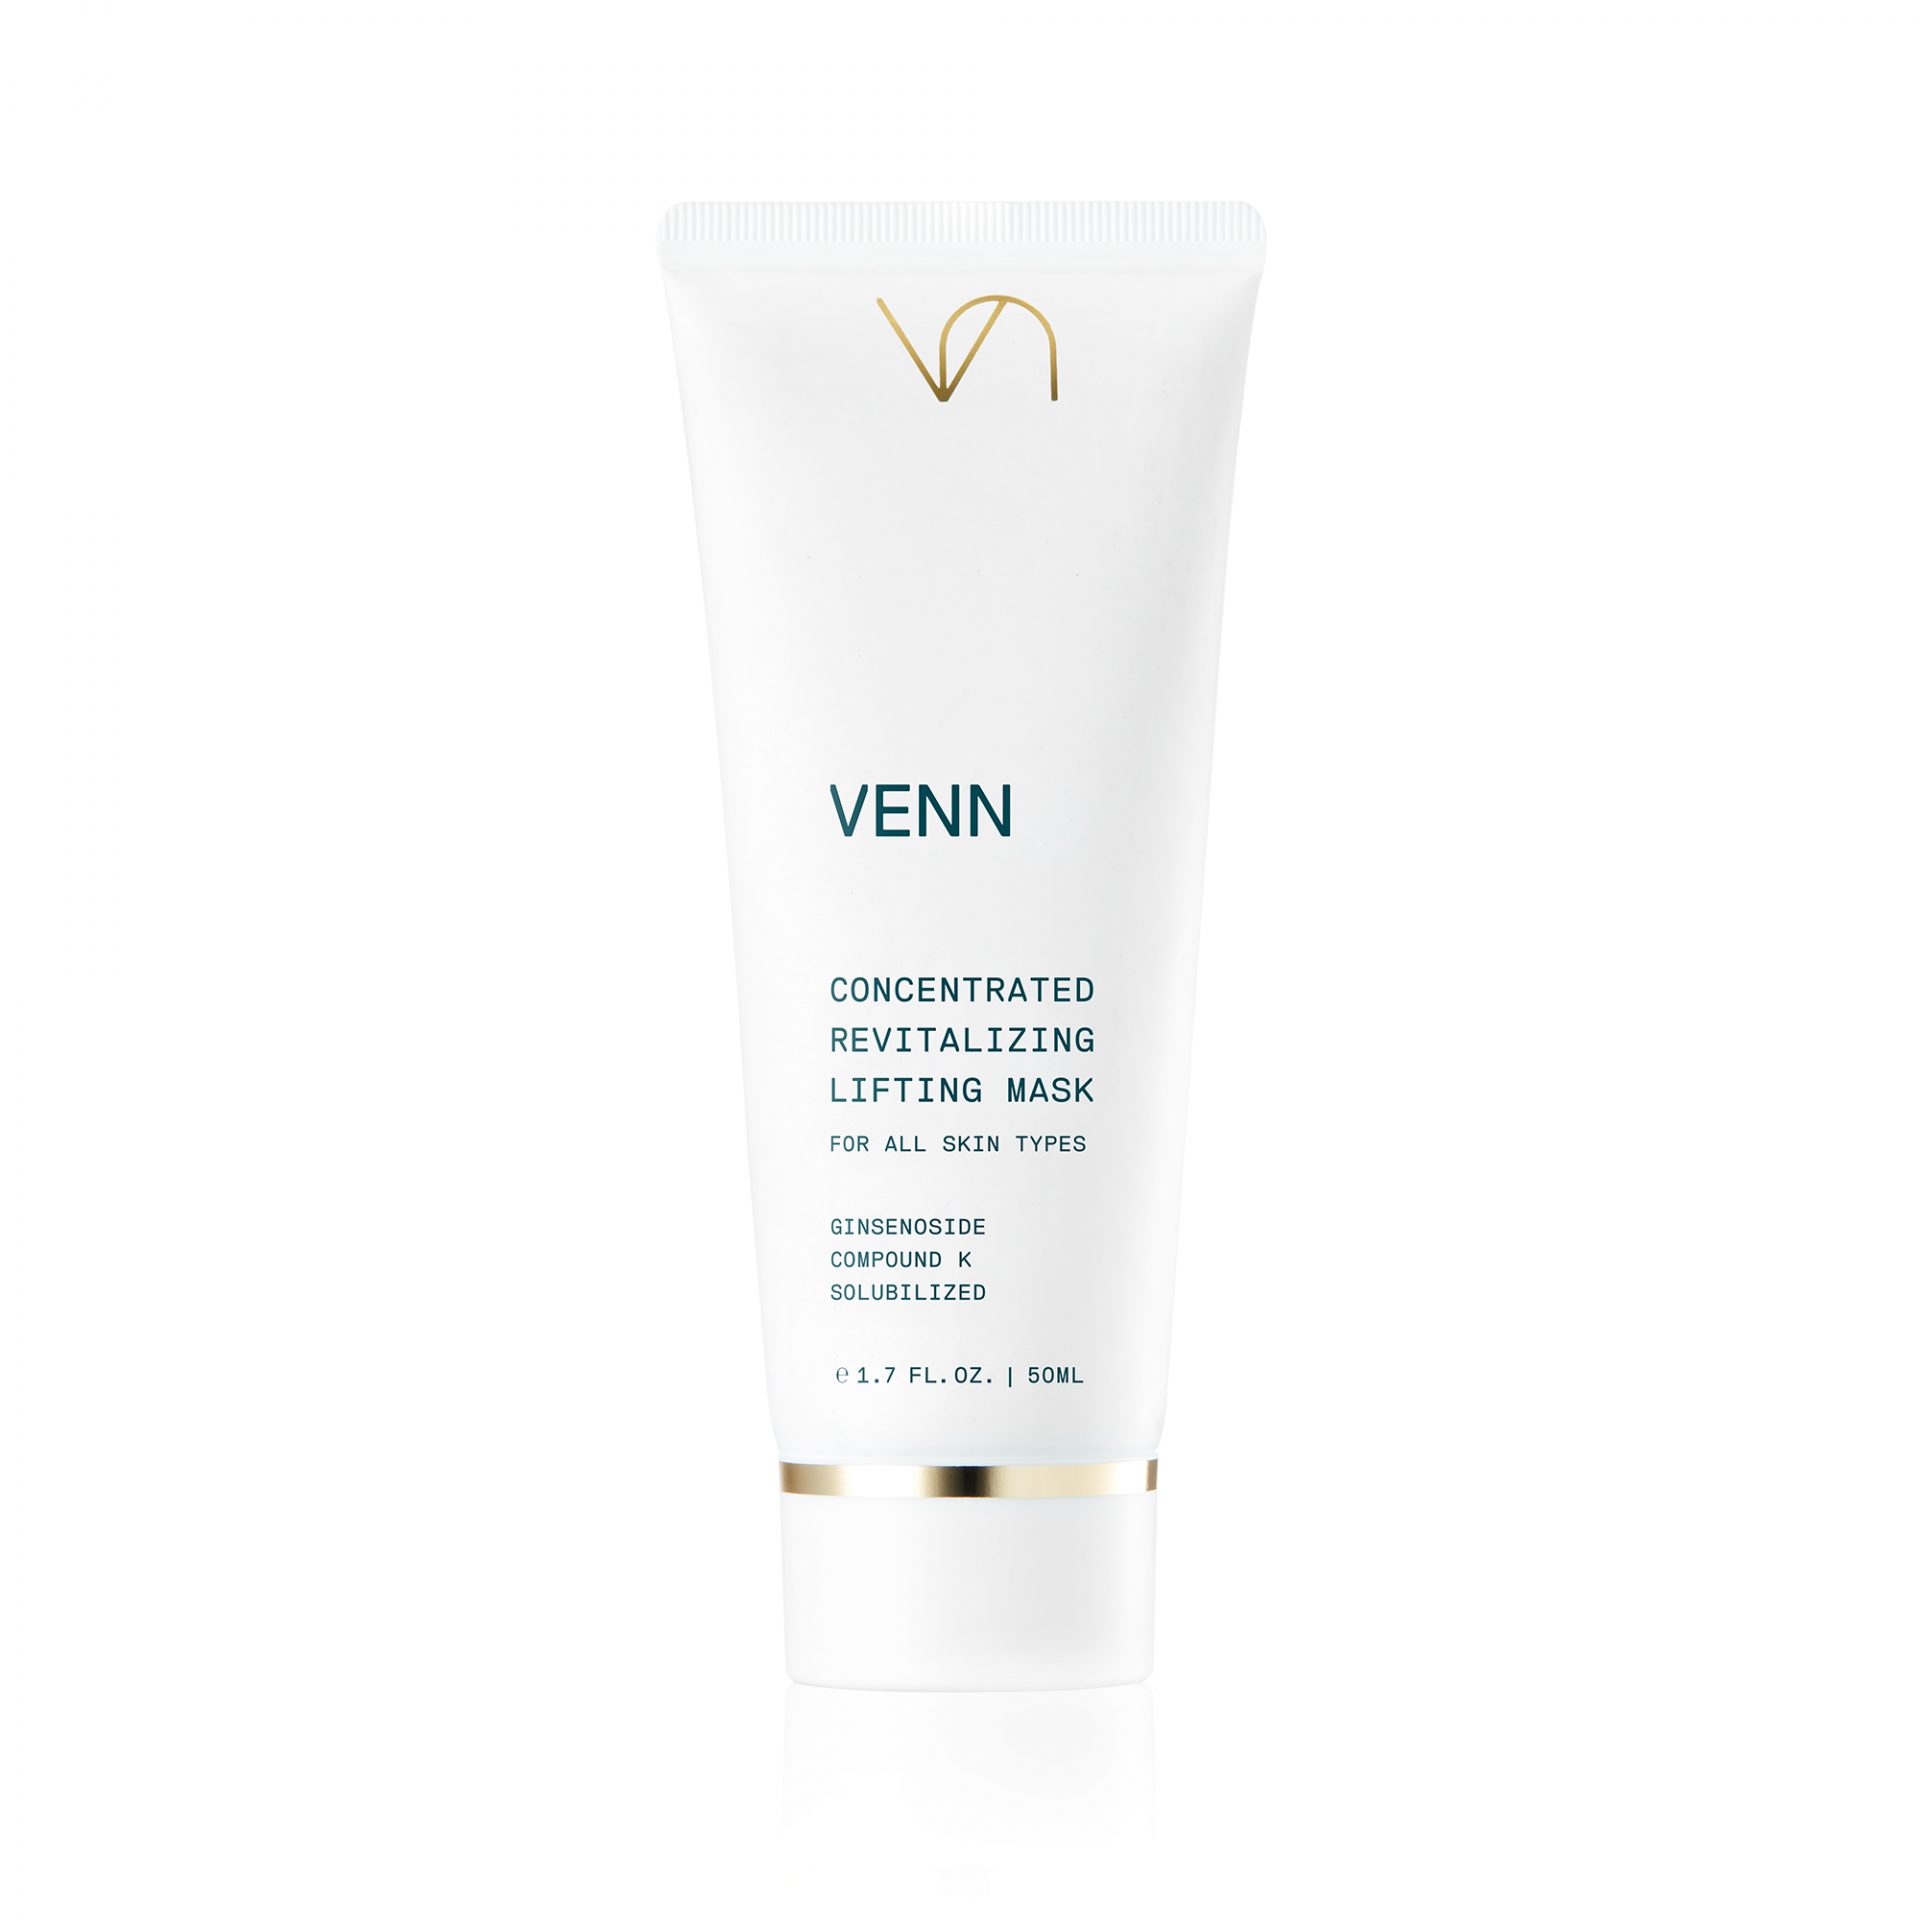 Venn Concentrated Revitalizing Lifting Mask